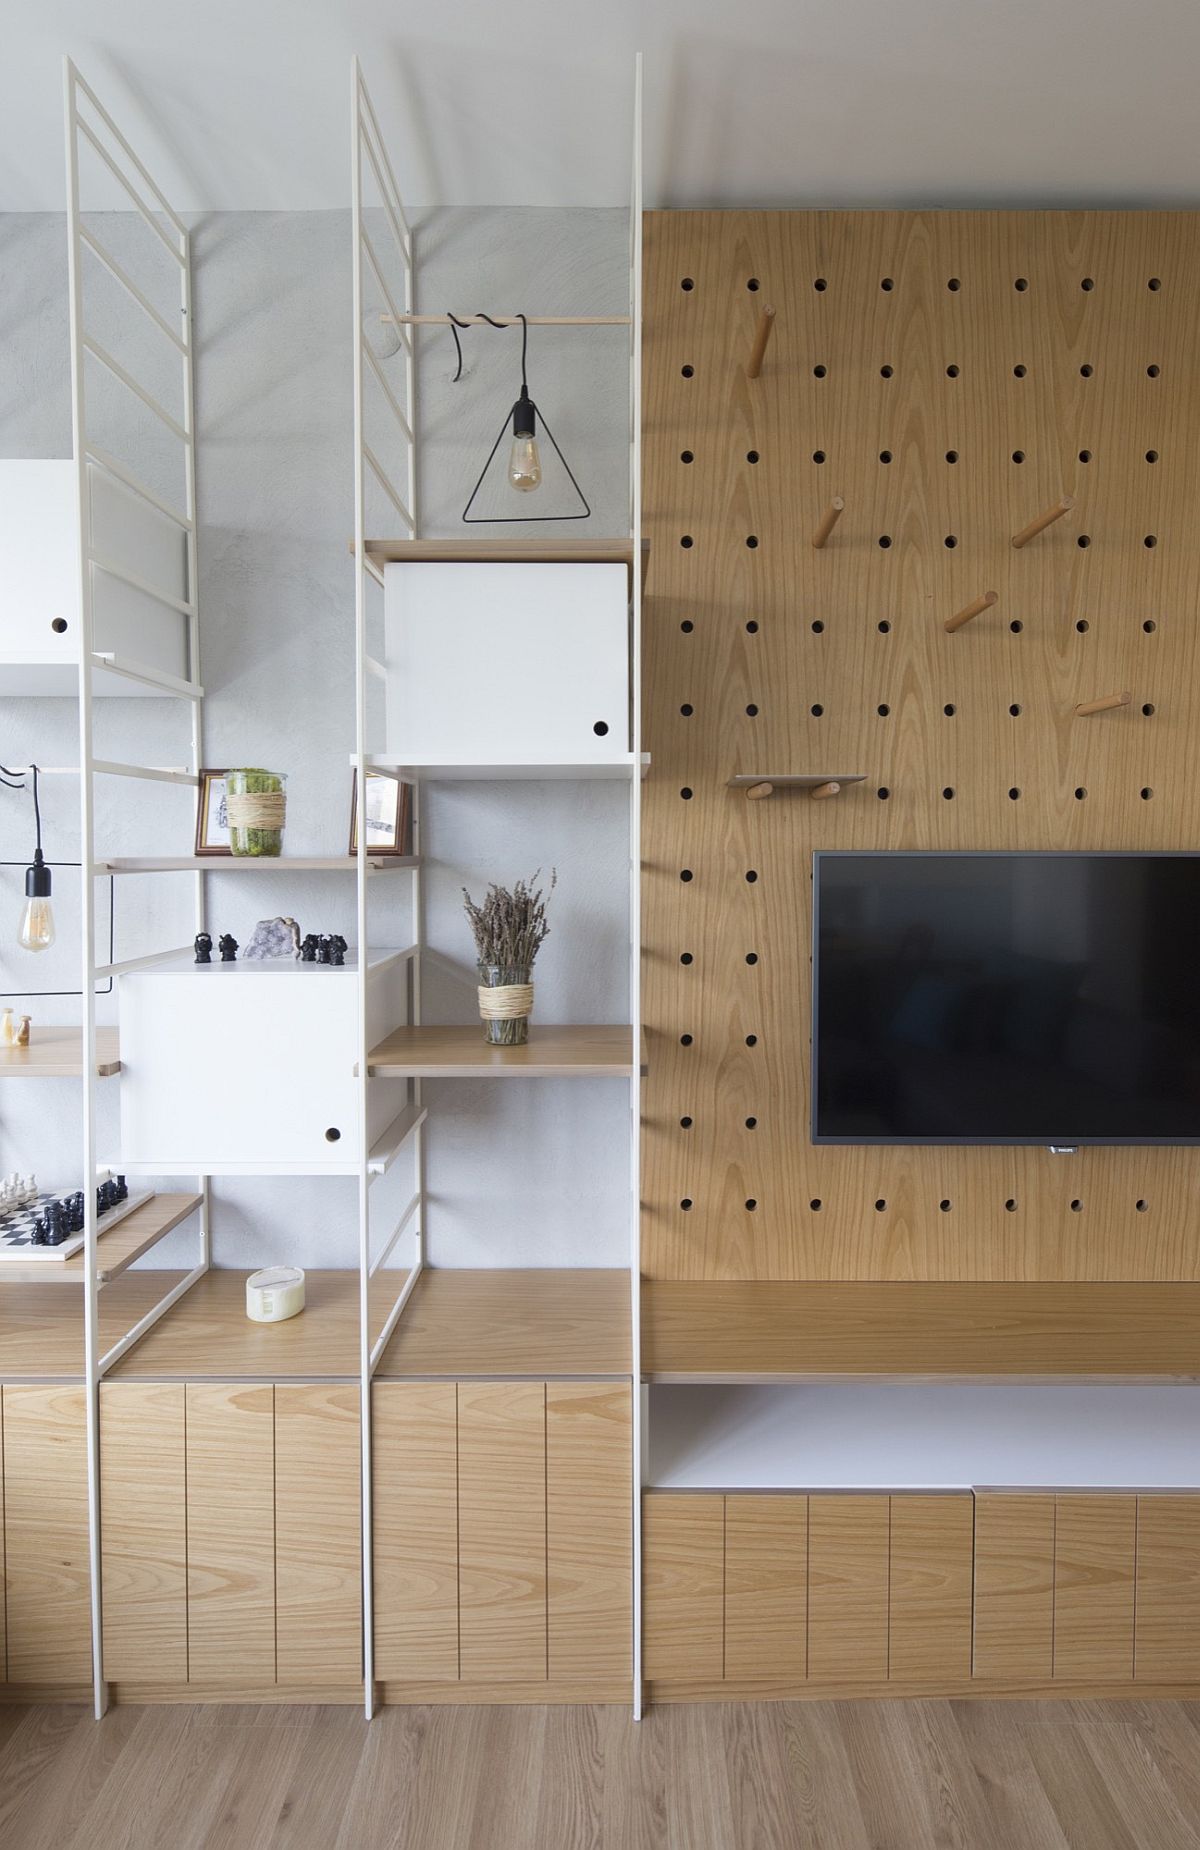 Custom-shelves-and-cabinets-next-to-the-TV-unit-with-mouldar-style